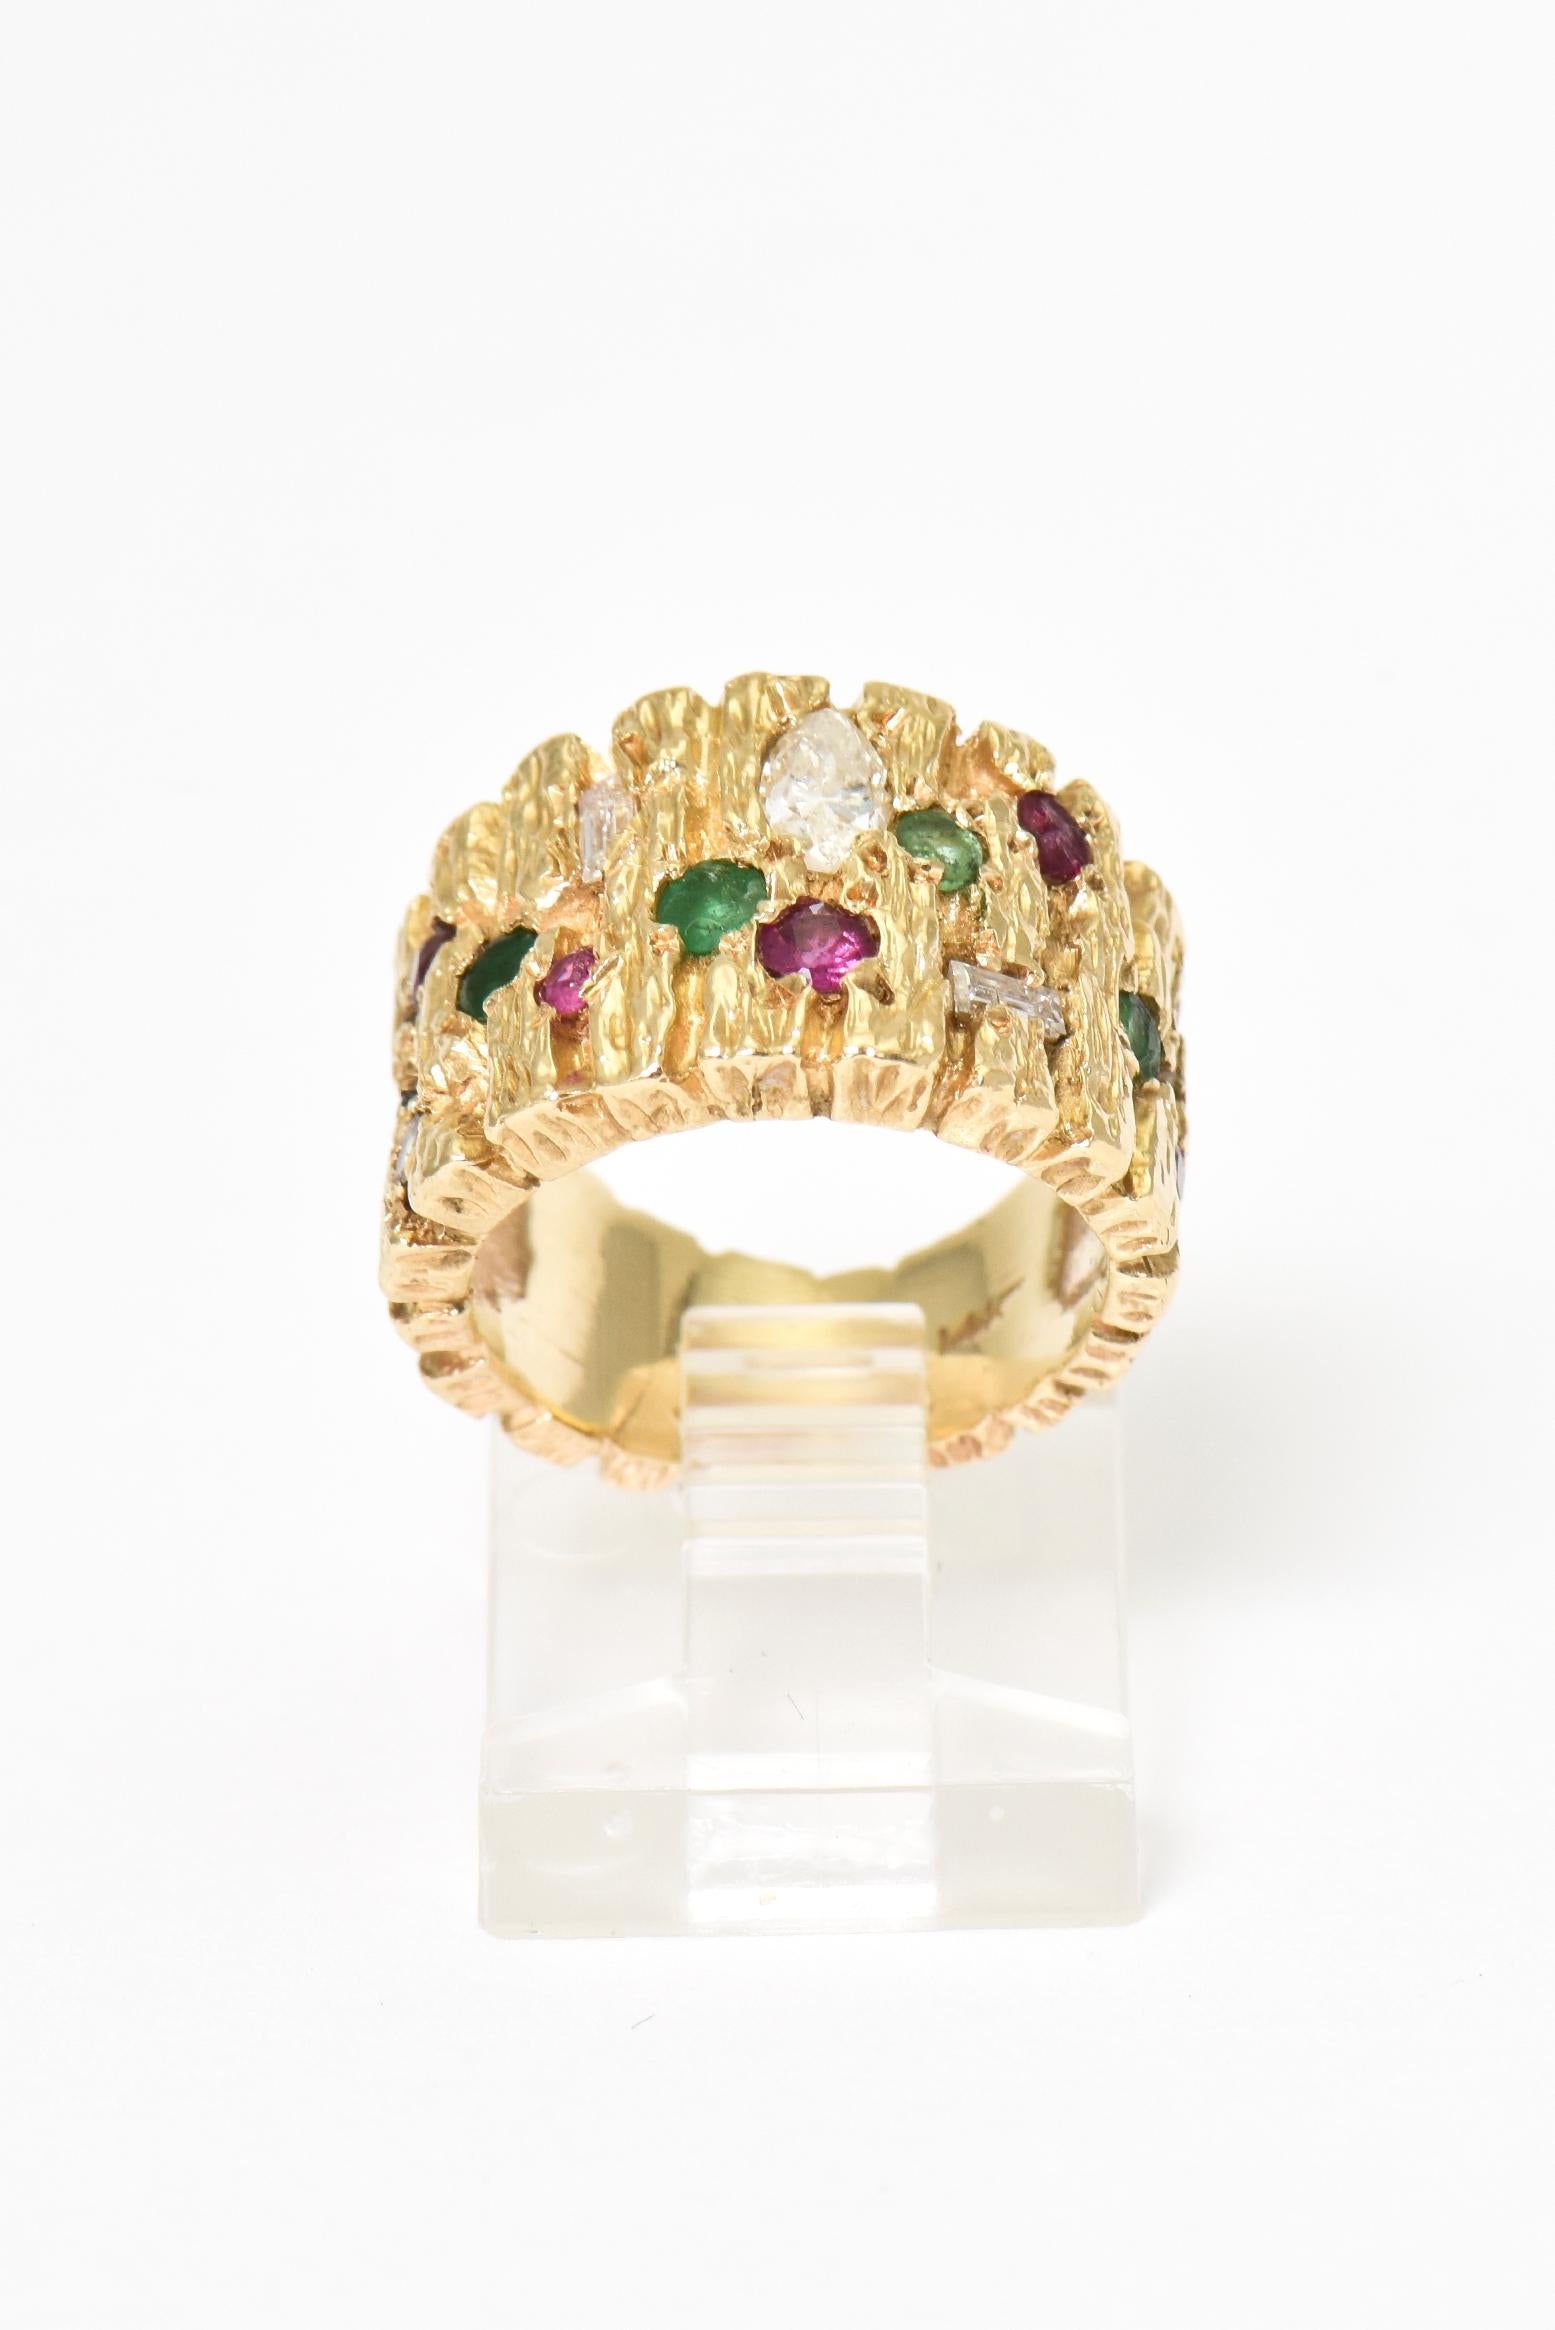 Modernist brutalist ring with inset diamond, rubies and emeralds in a wide 14k yellow gold mounting.

Size 4